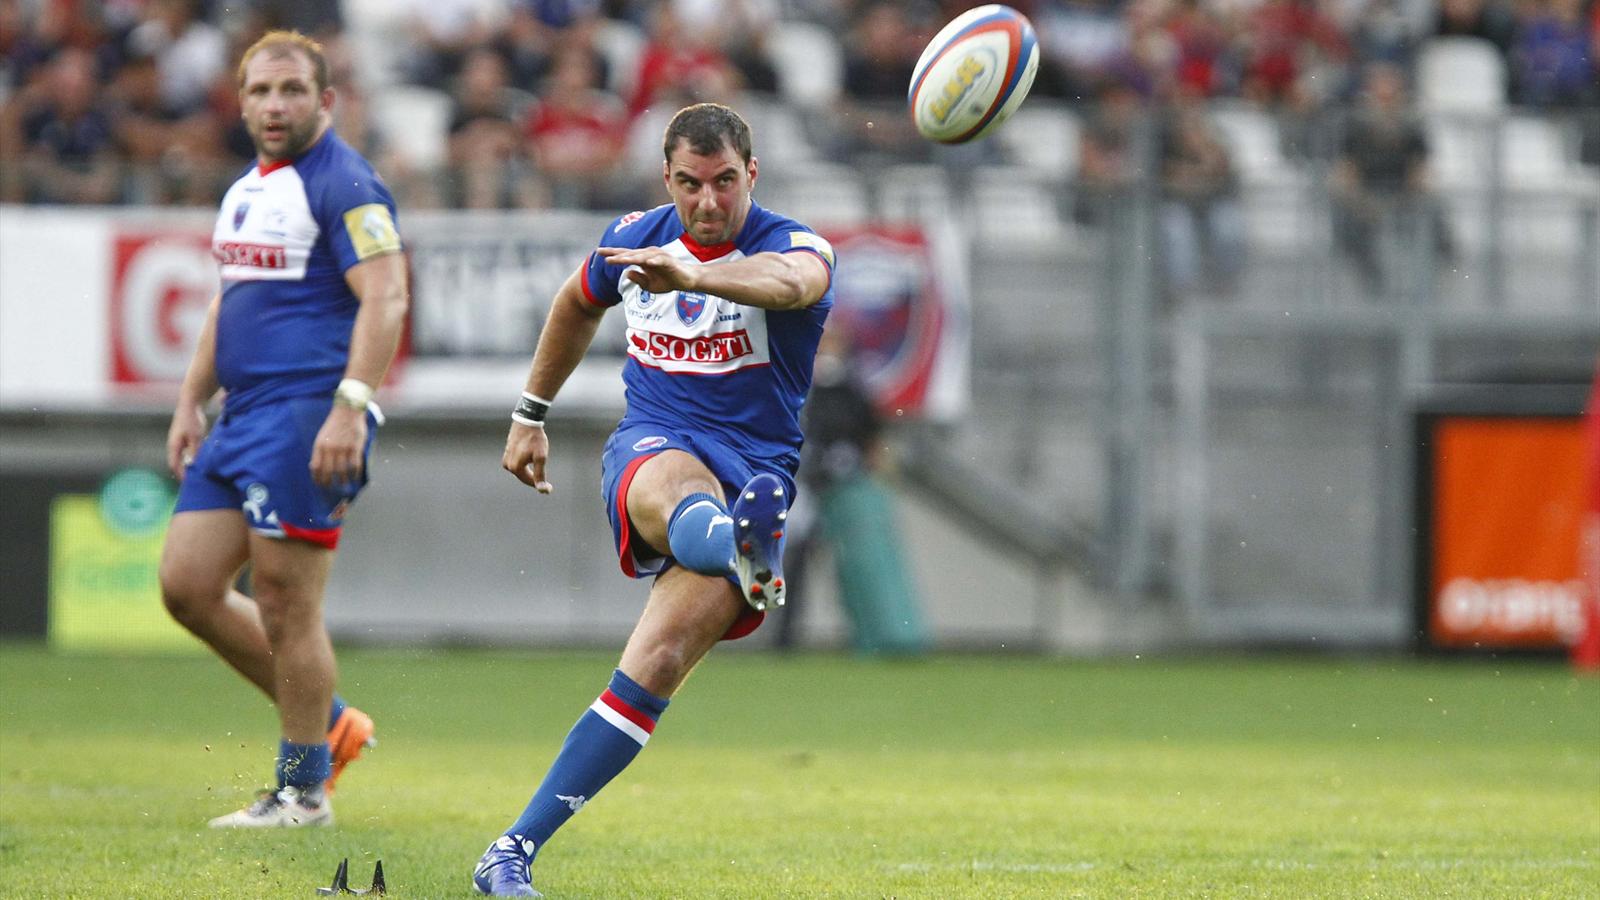 Match Rugby RC Toulon vs Grenoble en direct live streaming